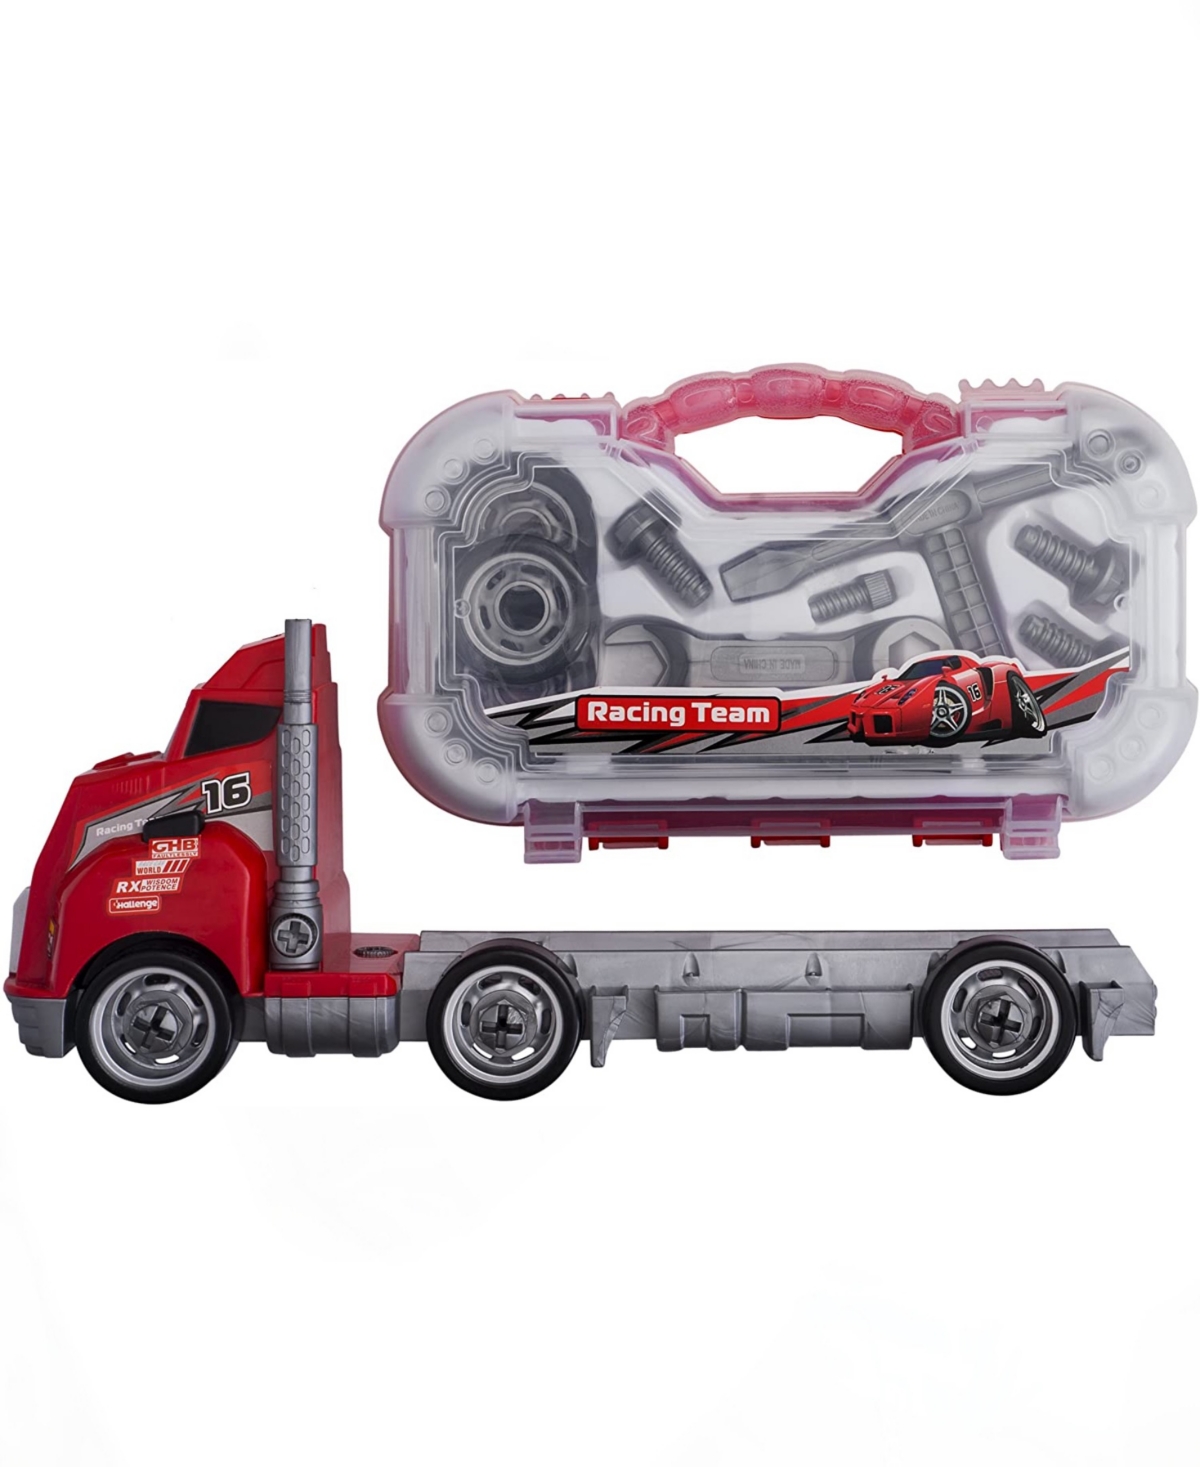 Big Daddy Babies' Big Rig Non-battery Powered Tool Box Master And Carrier System In Multi Colored Plastic